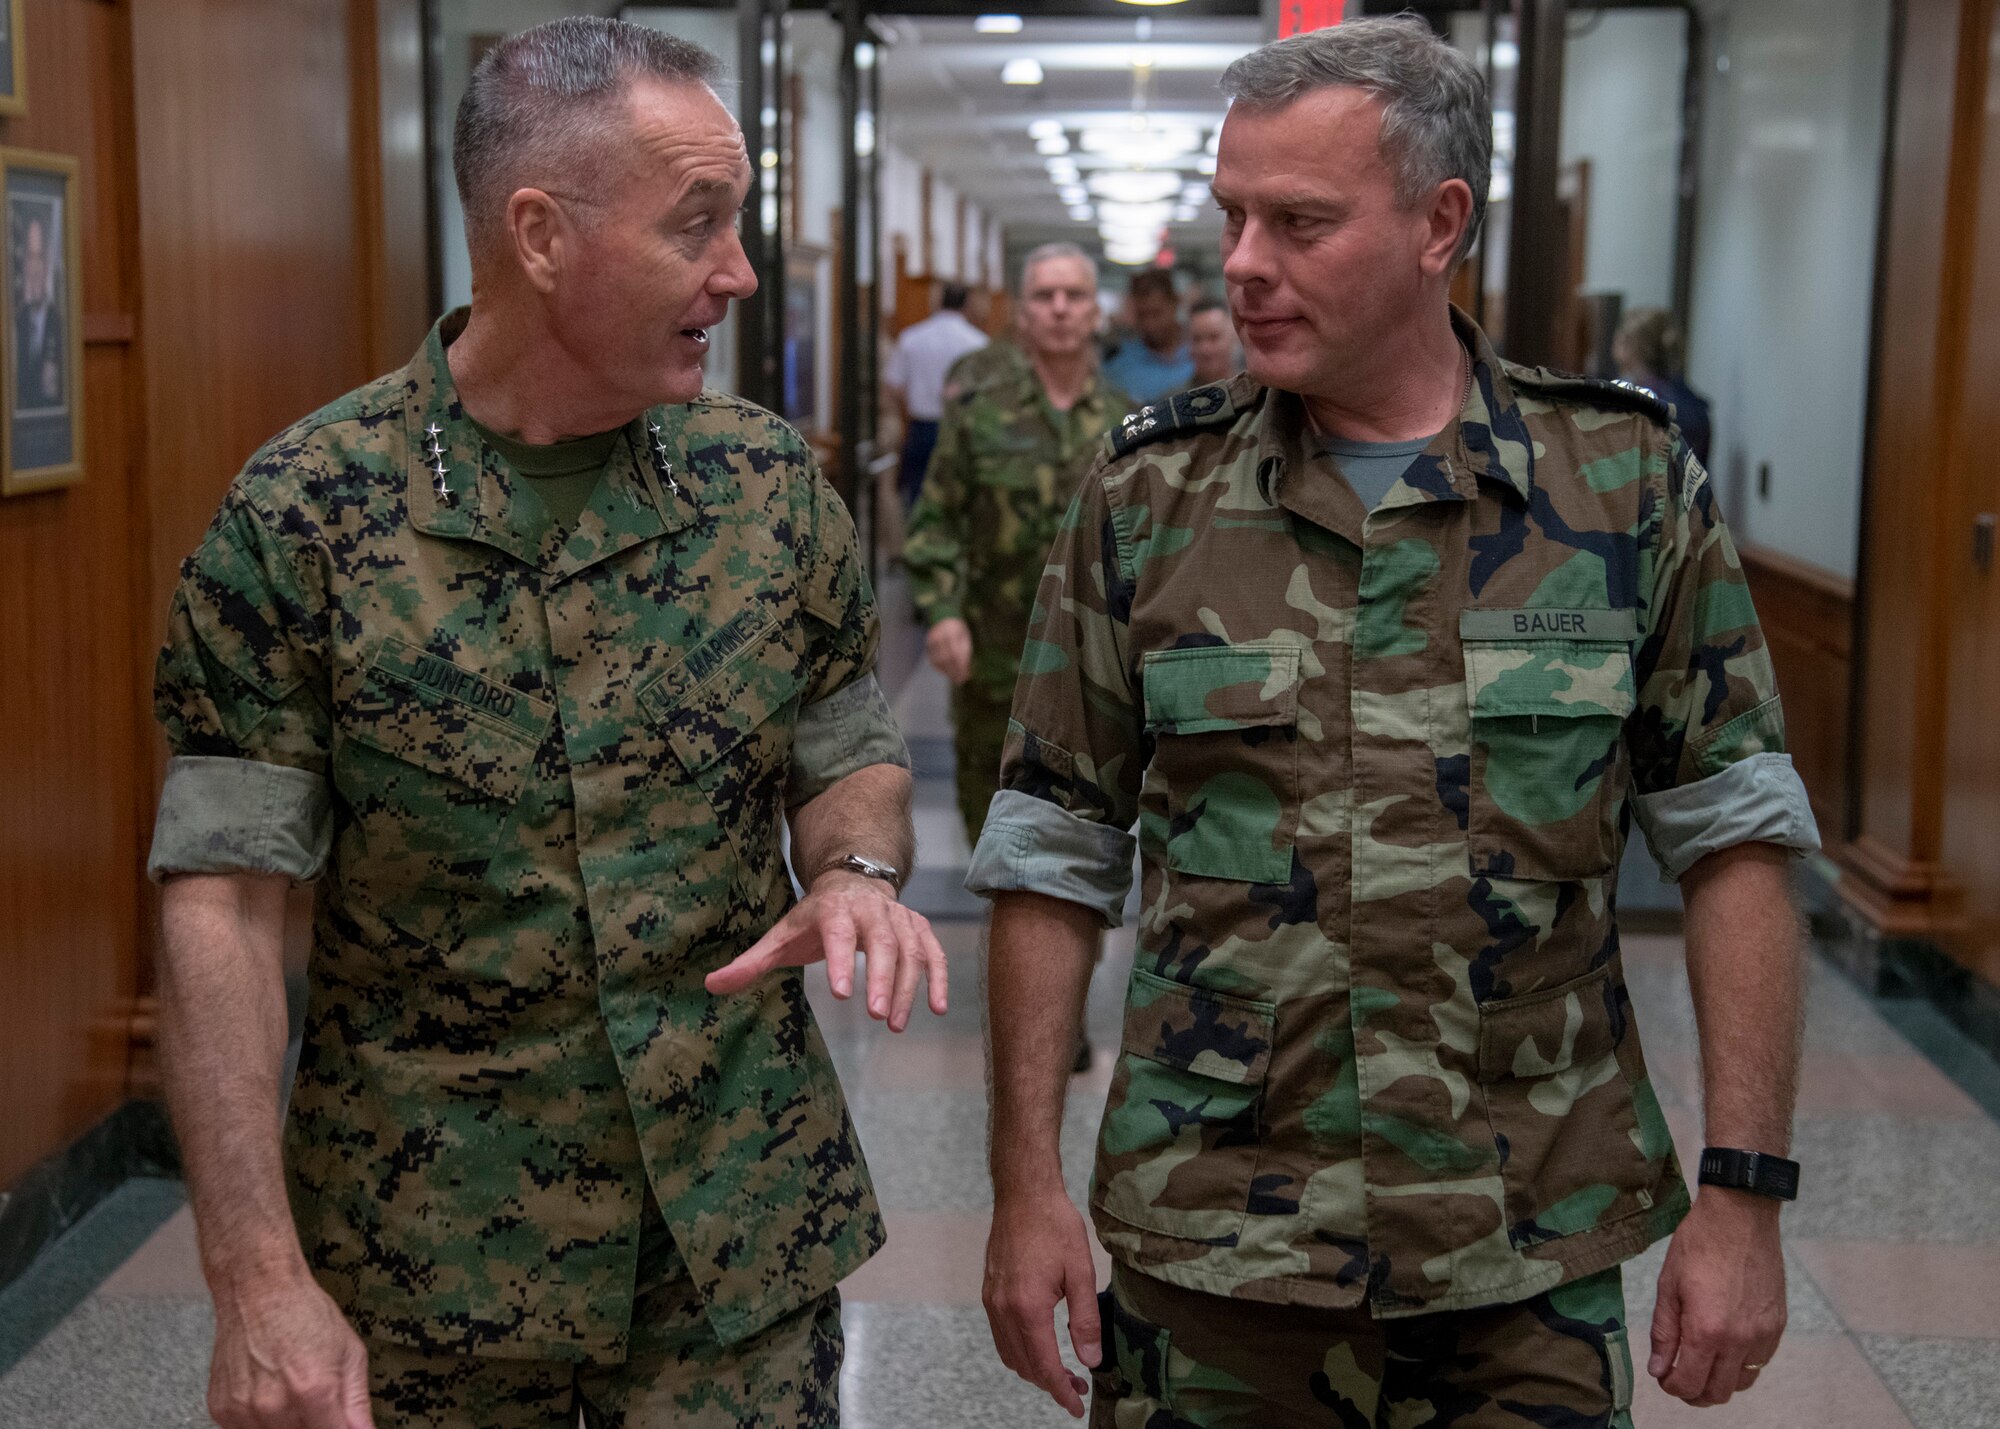 Chairman of the Joint Chiefs of Staff Gen. Joe Dunford meets with Netherlands Chief of Defense Adm. Rob Bauer in Washington D.C. Oct. 15, 2018.